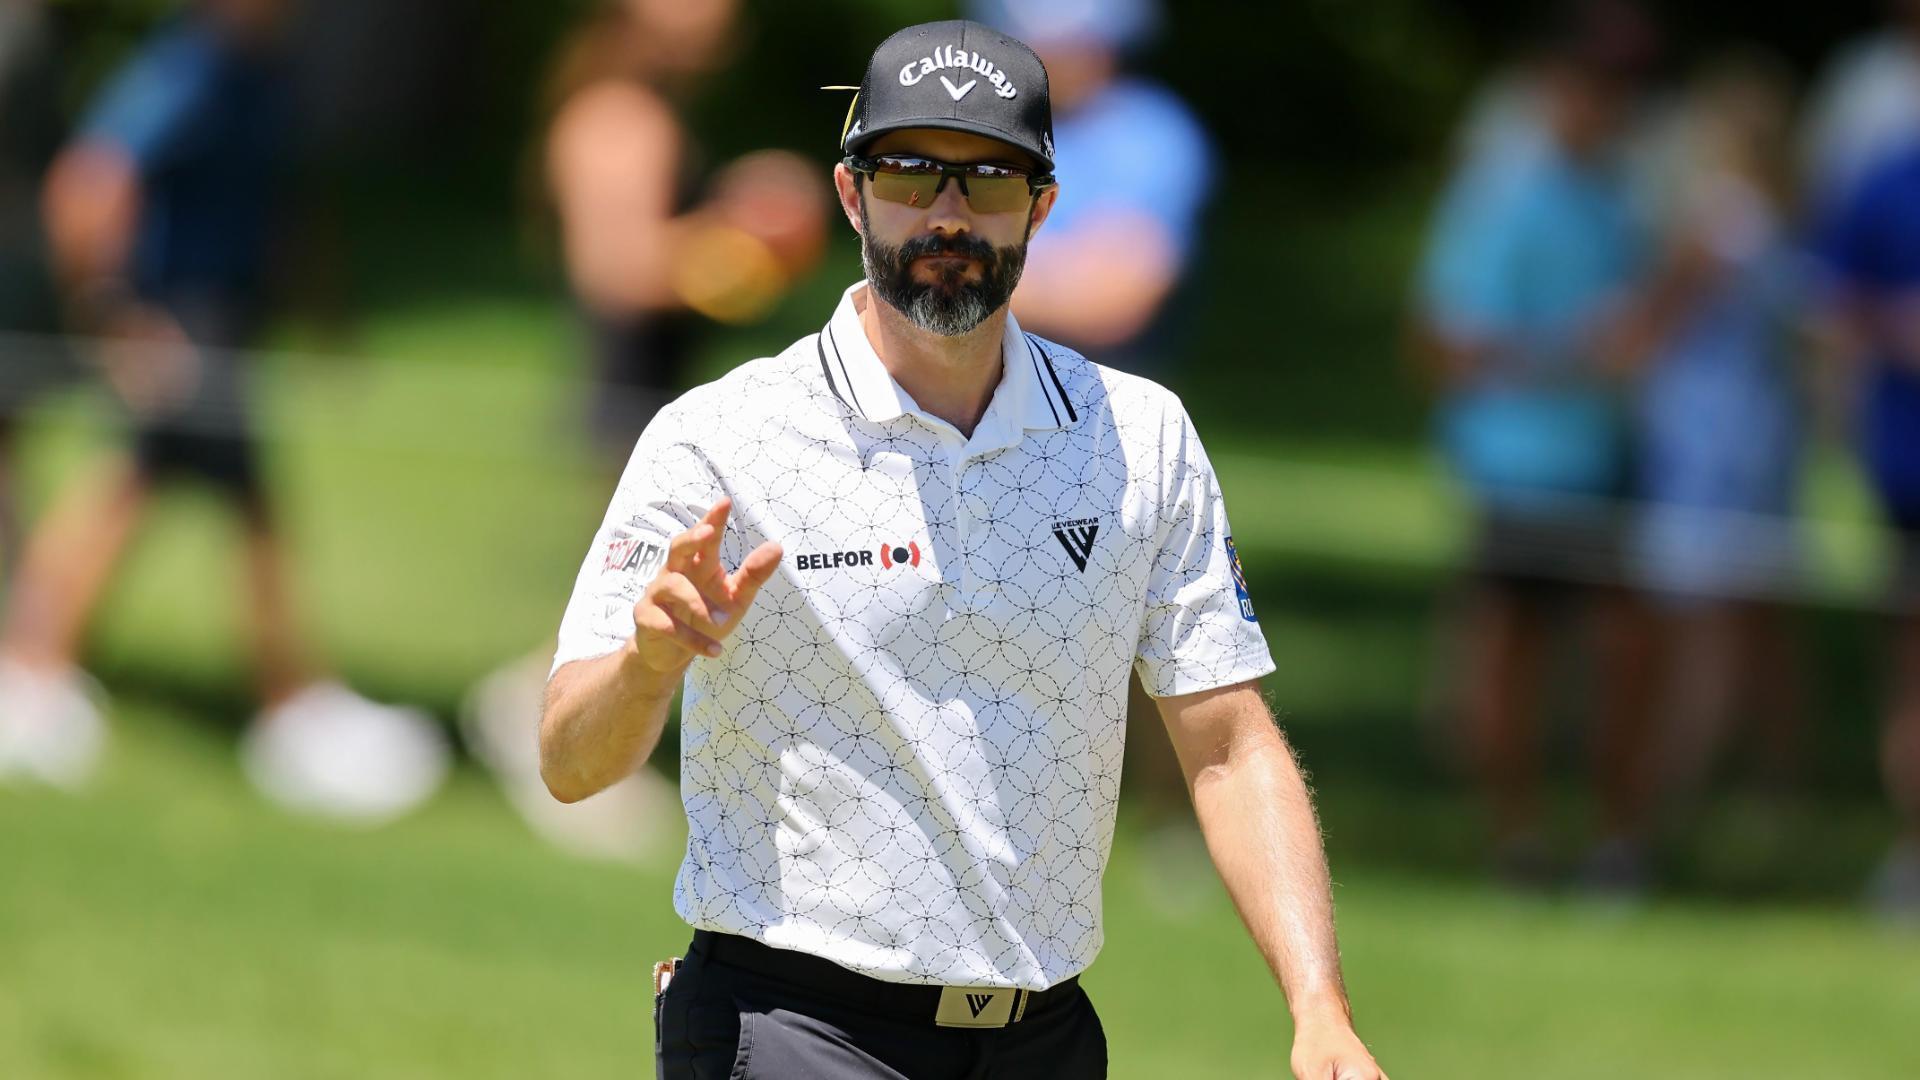 Adam Hadwin gets his final round started with a chip-in birdie